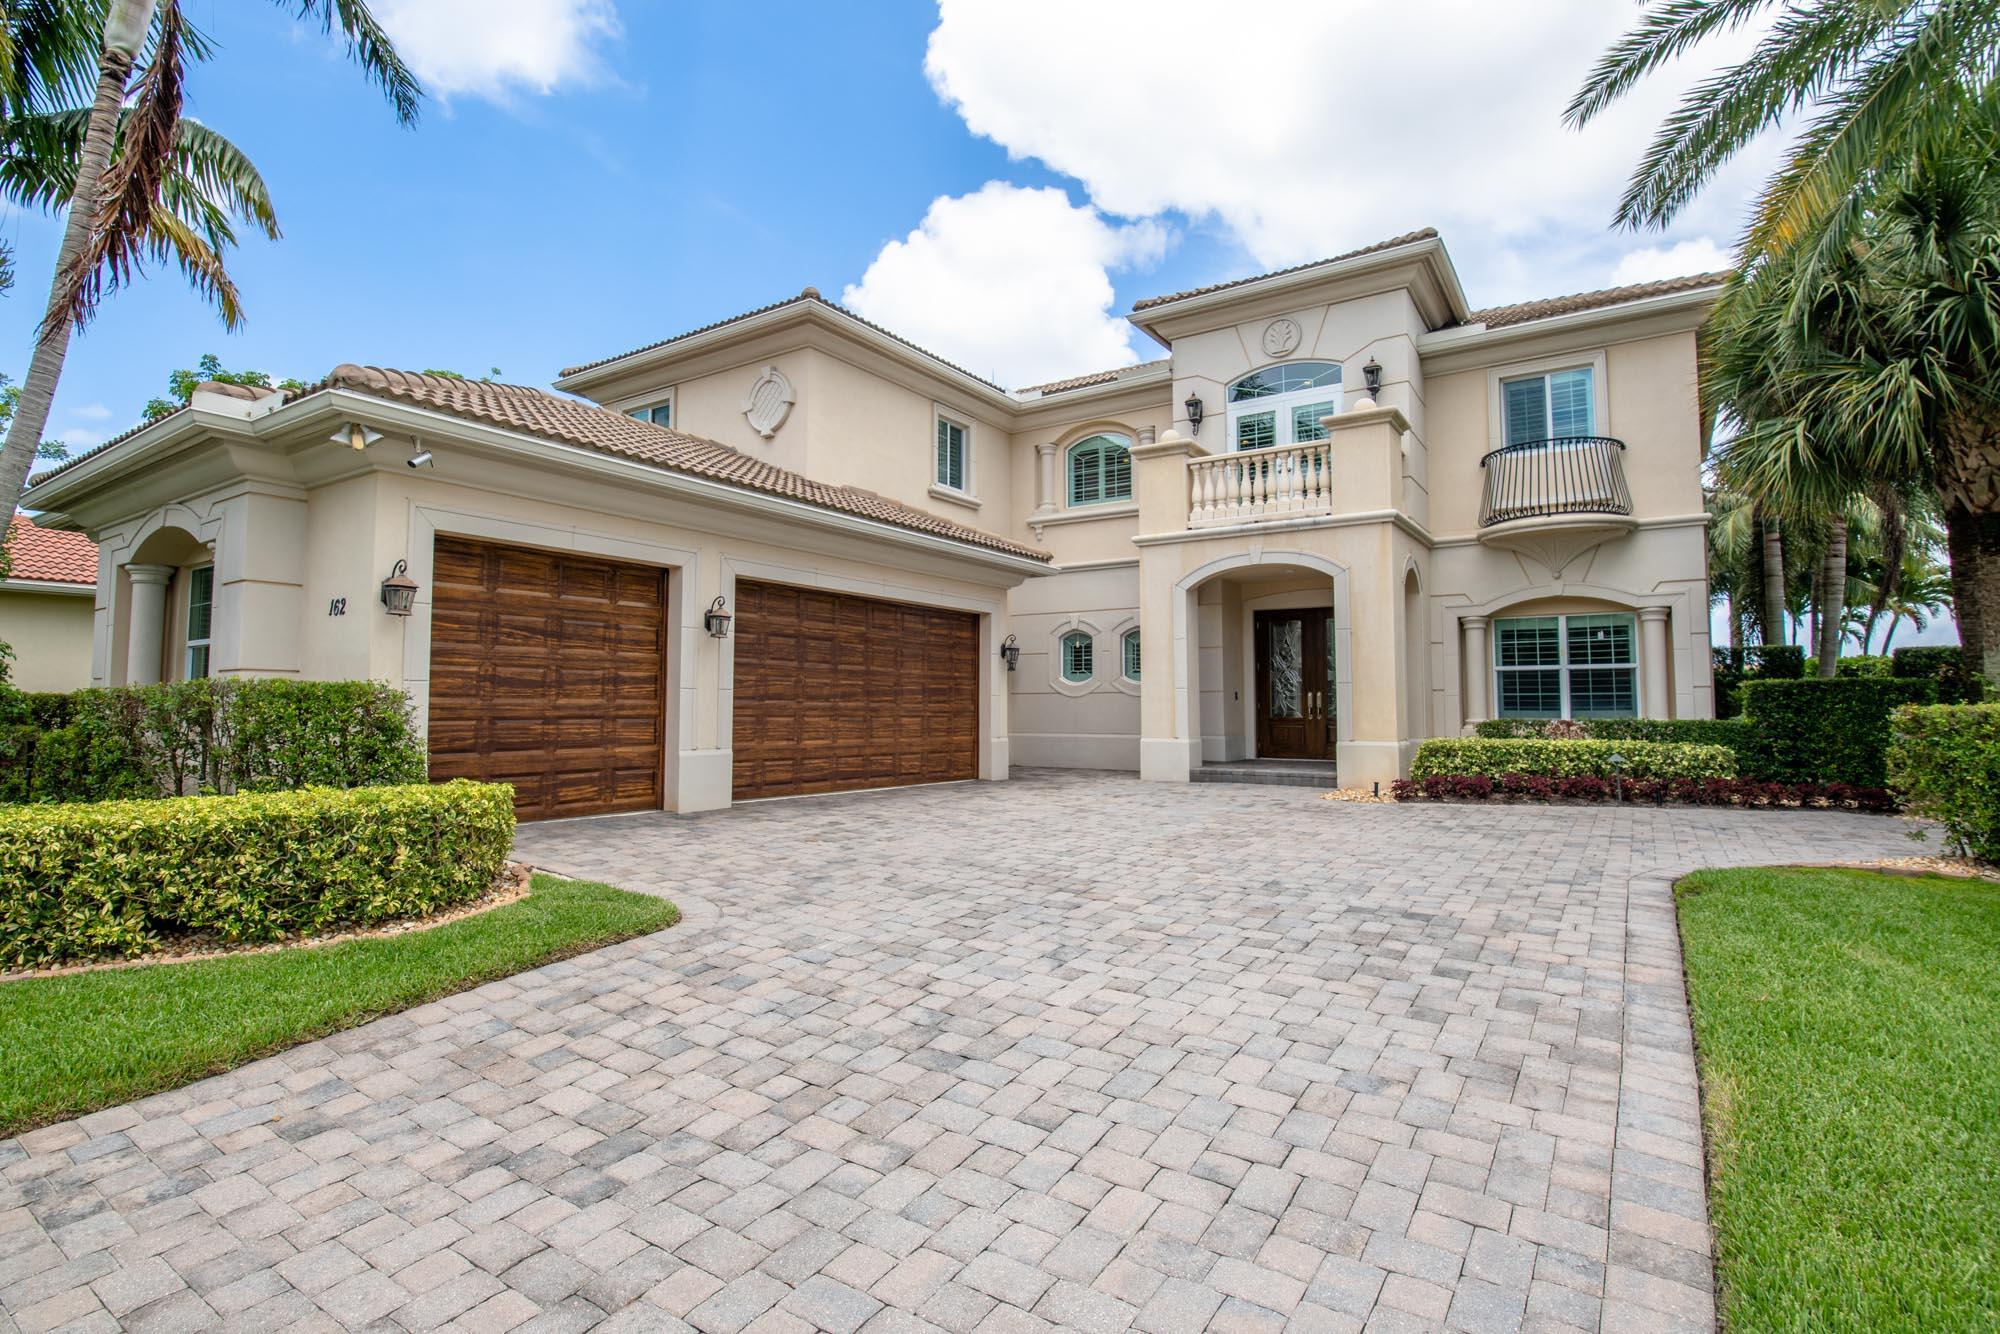 Luxuriously appointed and located in the private gated golf course community of Jupiter Country Club, this coveted Carina model is a wonderful floor plan that offers 5 bedrooms, 5 1/2 baths (including HIS & HER primary baths + closets) plus an office, loft and a 3 1/2 car garage. **BONUS: FULL GOLF MEMBERSHIP is available to the buyer of this home.** Full Golf & Associate Memberships are increasing to $100k & $50k effective August 1, 2024. Take advantage of the savings opportunity and close by August 1, 2024. There is currently a long waitlist for this sought-after level of membership. (Buyer could downgrade to social/club membership.) Experience outdoor living at its finest! Entertain guests by the saltwater pool and the gorgeous, custom summer kitchen with a wraparound bar. At the touch a button, operate the patio's motorized retractable screen and awning. Soak in the raised spa while relishing the stunning sunsets and entrancing fire bowl feature. The kitchen and family room area is the heart of the home. Gather for casual meals at the cozy breakfast nook and prepare meals surrounded by the beautiful quartz countertops, additional prep sink, upgraded cabinetry, dual wall ovens and custom vent hood. The divine primary suite is downstairs, boasting 2 separate spa-like bathrooms and walk-in closets, and a large sitting or desk area. Also downstairs is a guest suite with an en-suite bath and private patio. The curved staircase takes you to a spacious loft/flex space and access to the 3 guest bedrooms. One bedroom has an ensuite bath, the other two share a Jack n Jill bath. Arhaus light fixtures add to the elegant and welcoming ambiance of this home. Live comfortably in this energy efficient home with 3 AC units replaced in 2023, natural gas, tankless water heater, CBS construction, impact glass windows &amp; solid core doors. This home was also customized with 2 large storage rooms for storage optimization. The garage accommodates 3 cars PLUS a golf cart and has built-in storage galore. Jupiter Country Club is a luxury gated community conveniently located within close proximity of I-95 and the FL Turnpike, beaches, shopping, restaurants, parks &amp; nature preserves. Club amenities offer a plethora of social opportunities and include a Greg Norman Signature golf course, 2 resort-style pools, the newly remodeled Sway restaurant, a state-of-the-art fitness center + yoga/mat pilates/barre classes, tennis, bocce ball, pickle ball &amp; basketball. Members enjoy reciprocal privileges to Invited Clubs worldwide. Live your best life here!